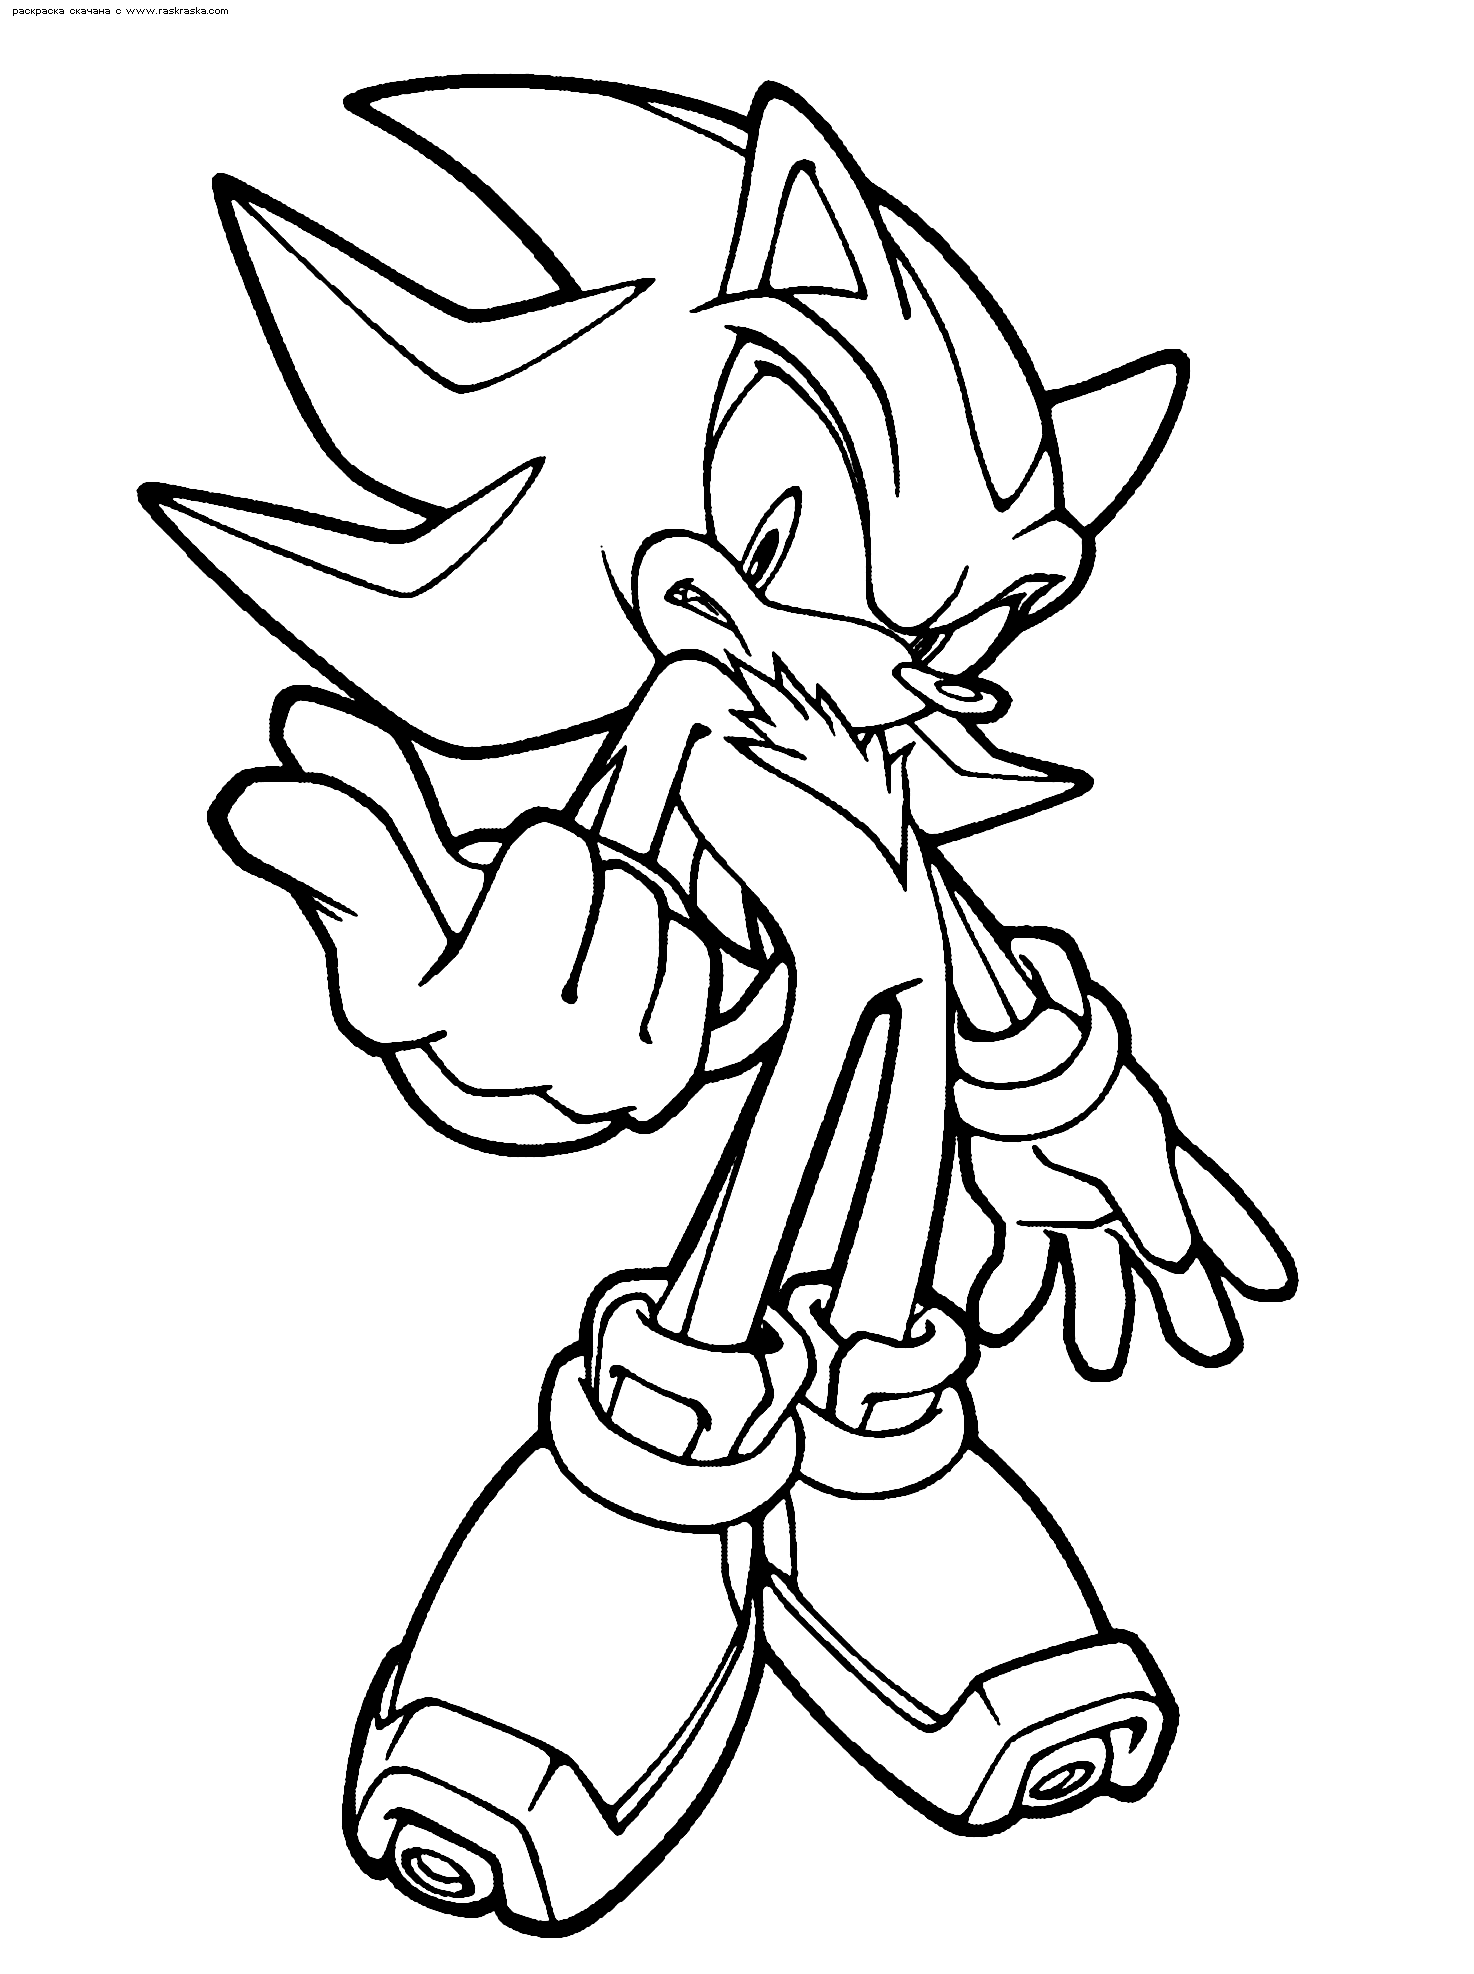 sonic the hedgehog coloring pages sonic the hedgehog coloring pages getcoloringpagescom the sonic hedgehog coloring pages 